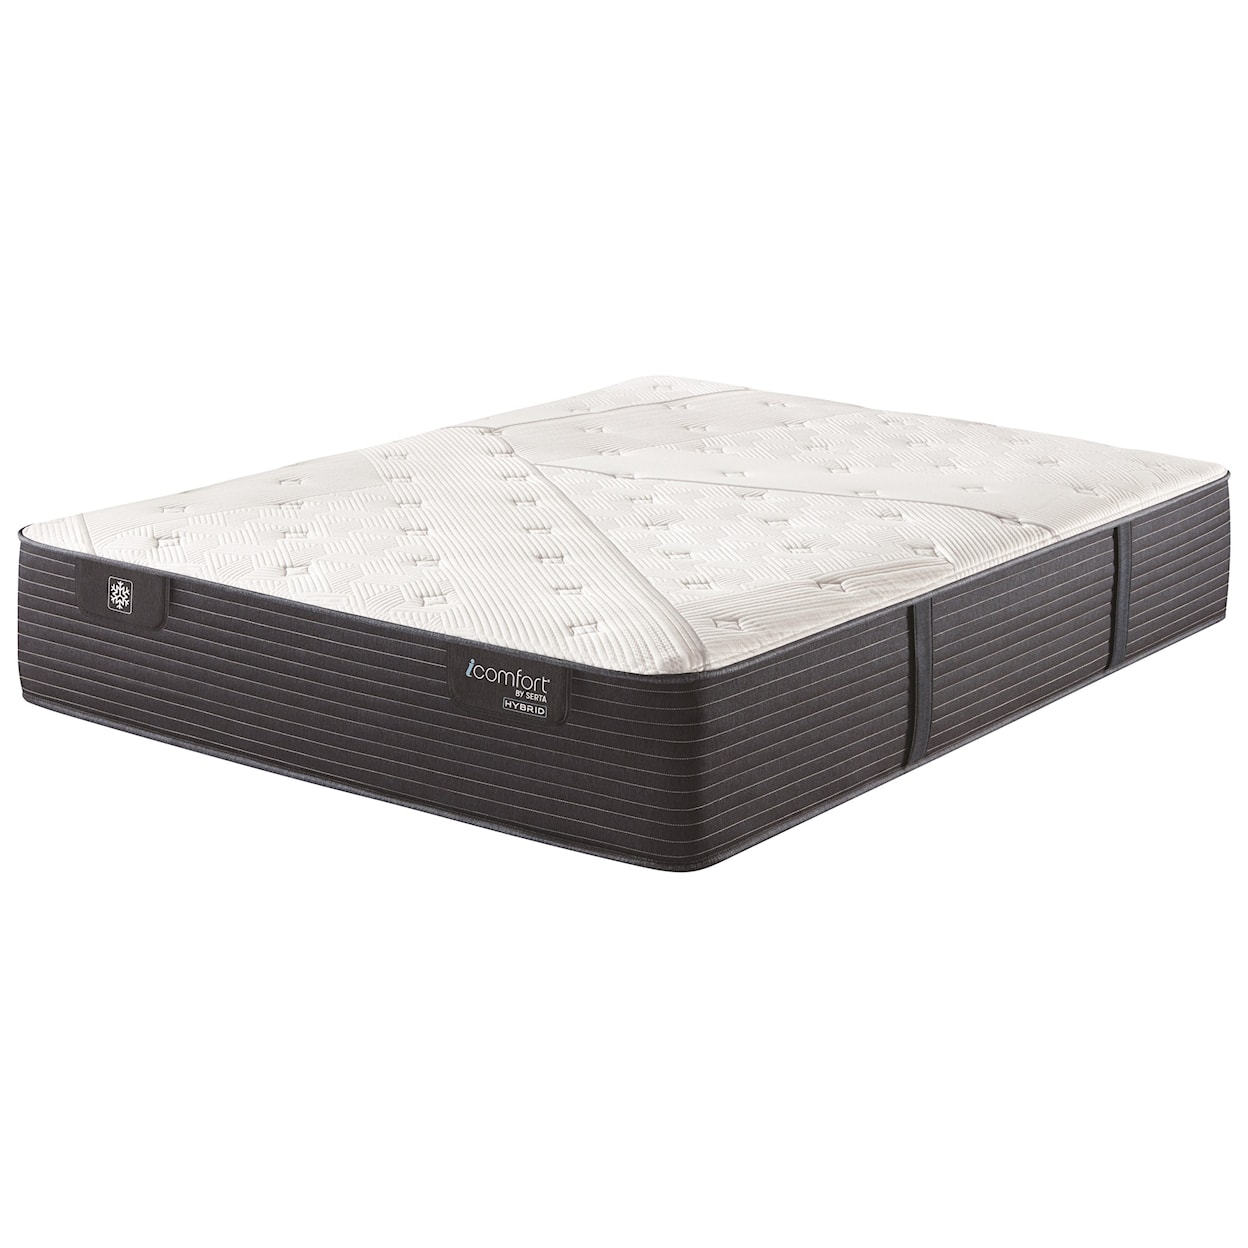 Serta CF1000 Quilted Hybrid II Firm Queen 13" Firm Quilted Hybrid Mattress